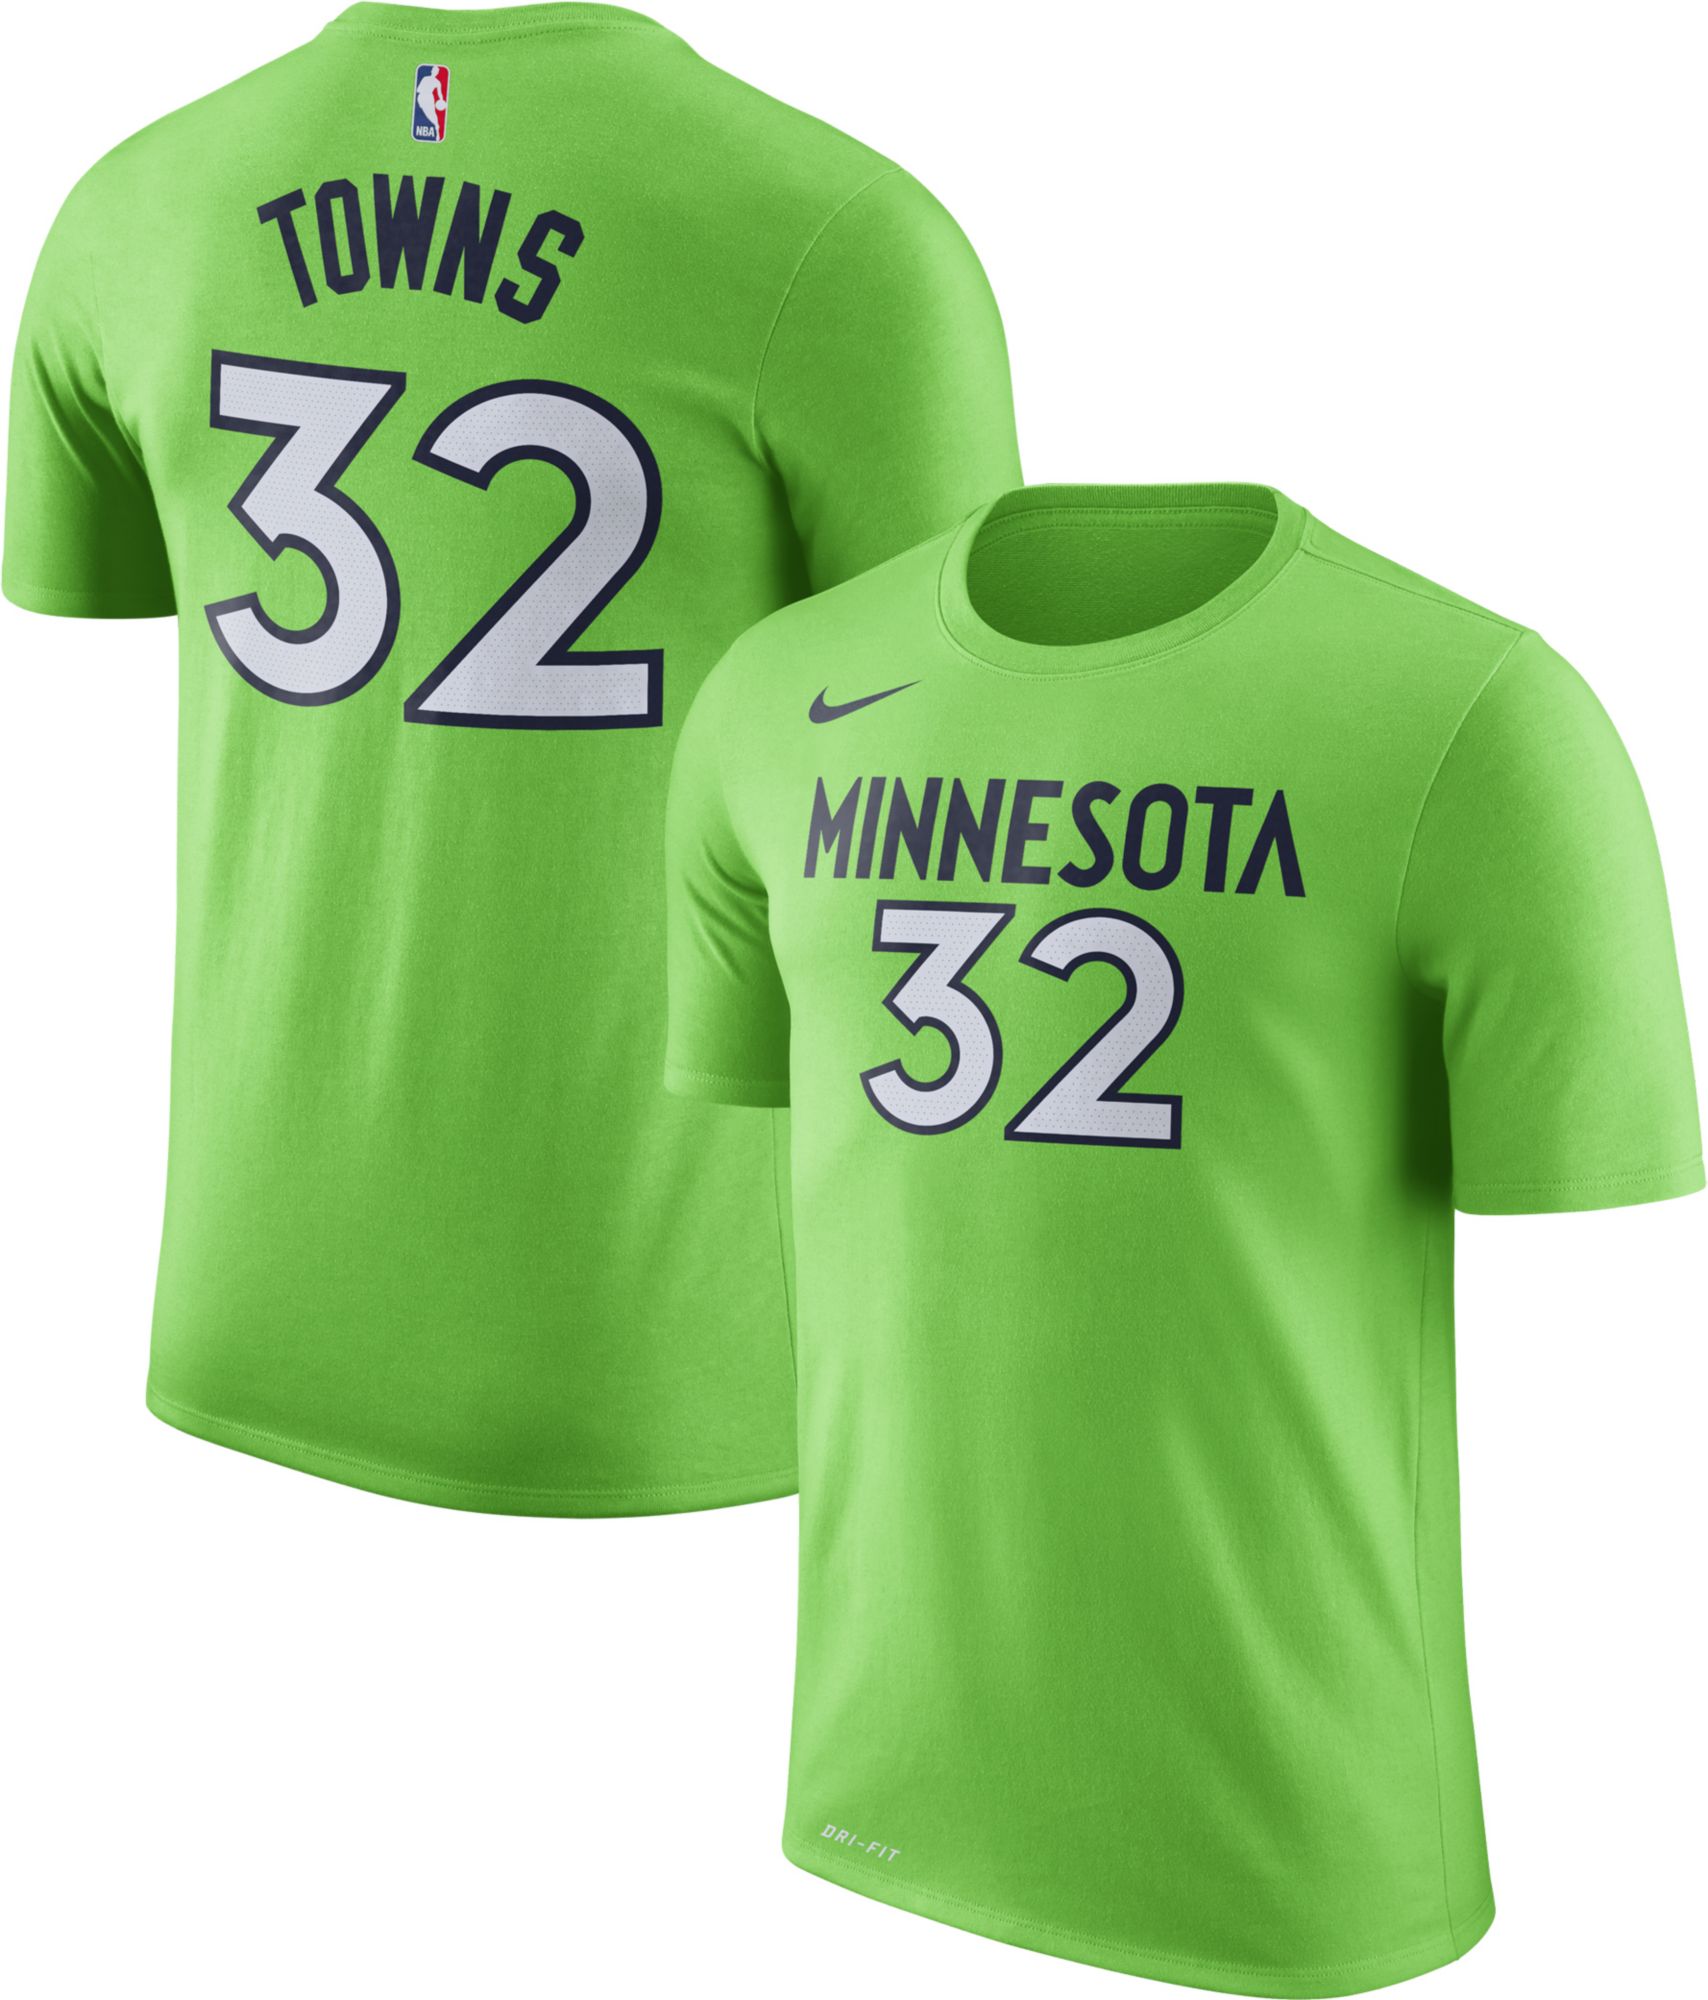 karl anthony towns youth jersey